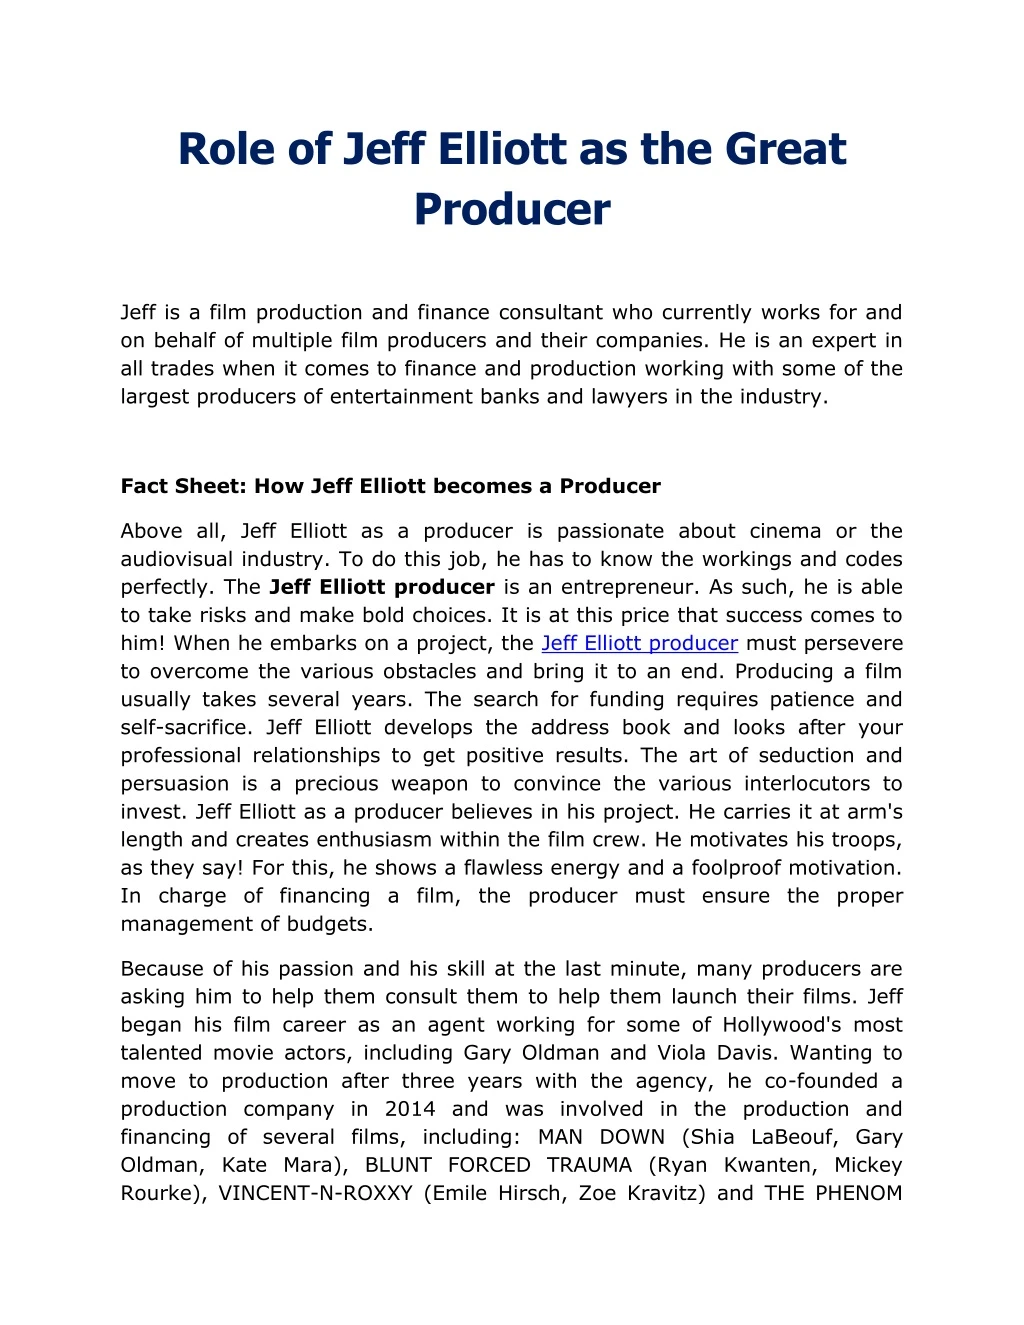 role of jeff elliott as the great producer